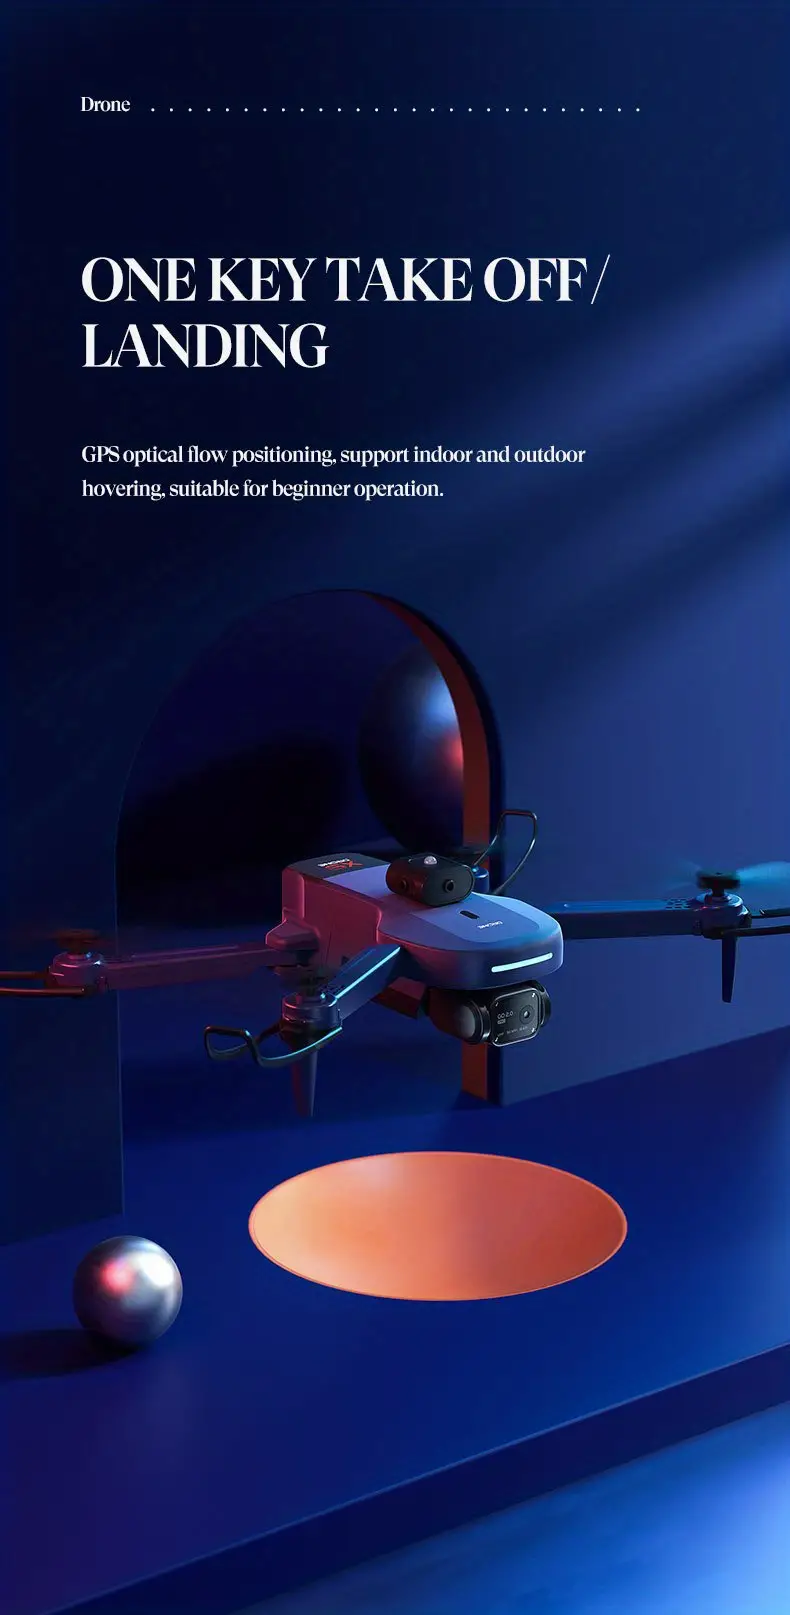 dual esc camera drone with 5g image transmission one key return stable electronic stabilized gimbal obstacle avoidance 1 2 batteries smart follow low power return good for beginners details 12